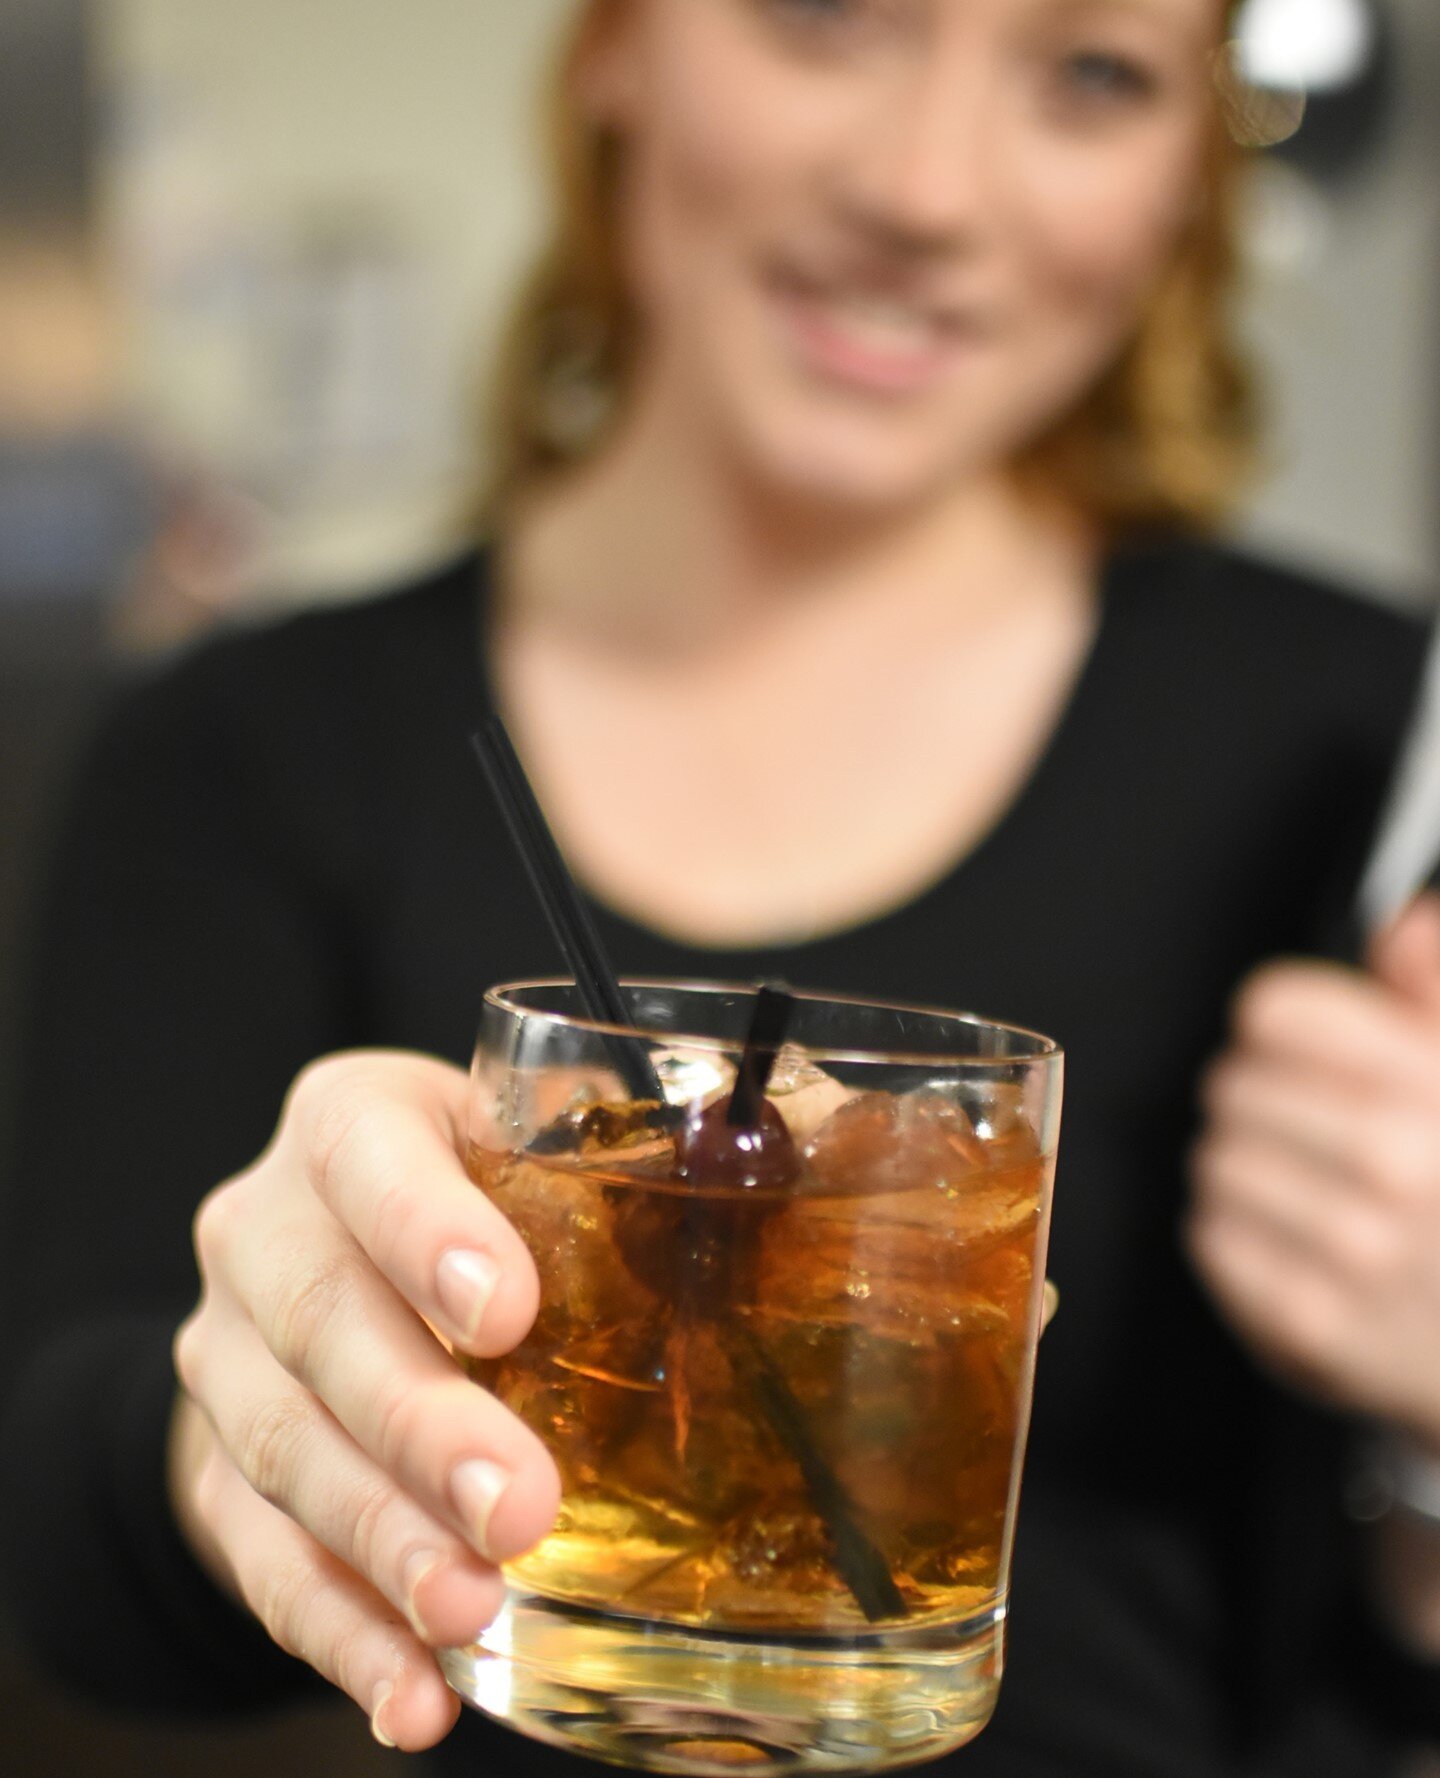 It's a great day for a delicious cocktail. Cheers! 🥃⁠
⁠
⁠
#akron #akronohio #eatlocalohio #akronfood #thisiscle #ohiofinditthere #ohioexplored #localeats #330 #akroneats #akronfoodie #eeeeeats #beautifulcuisines #freshseafood #besthappyhour #akronli